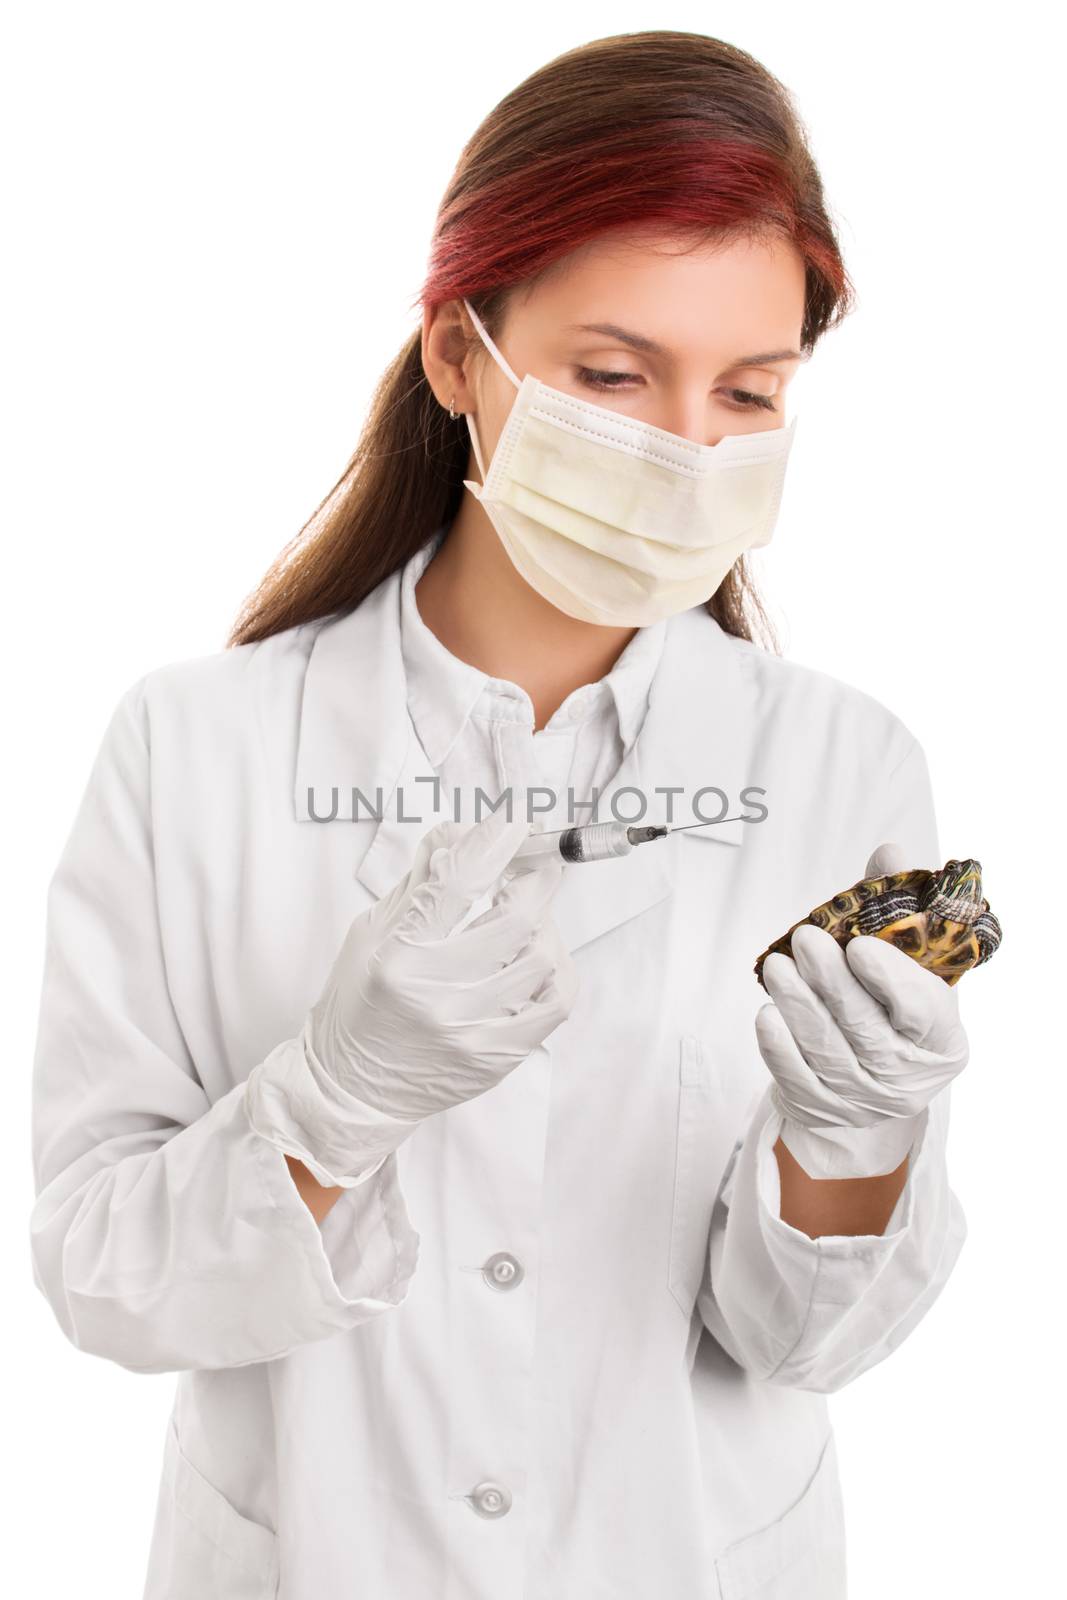 Young veterinarian examining a pet turtle by Mendelex